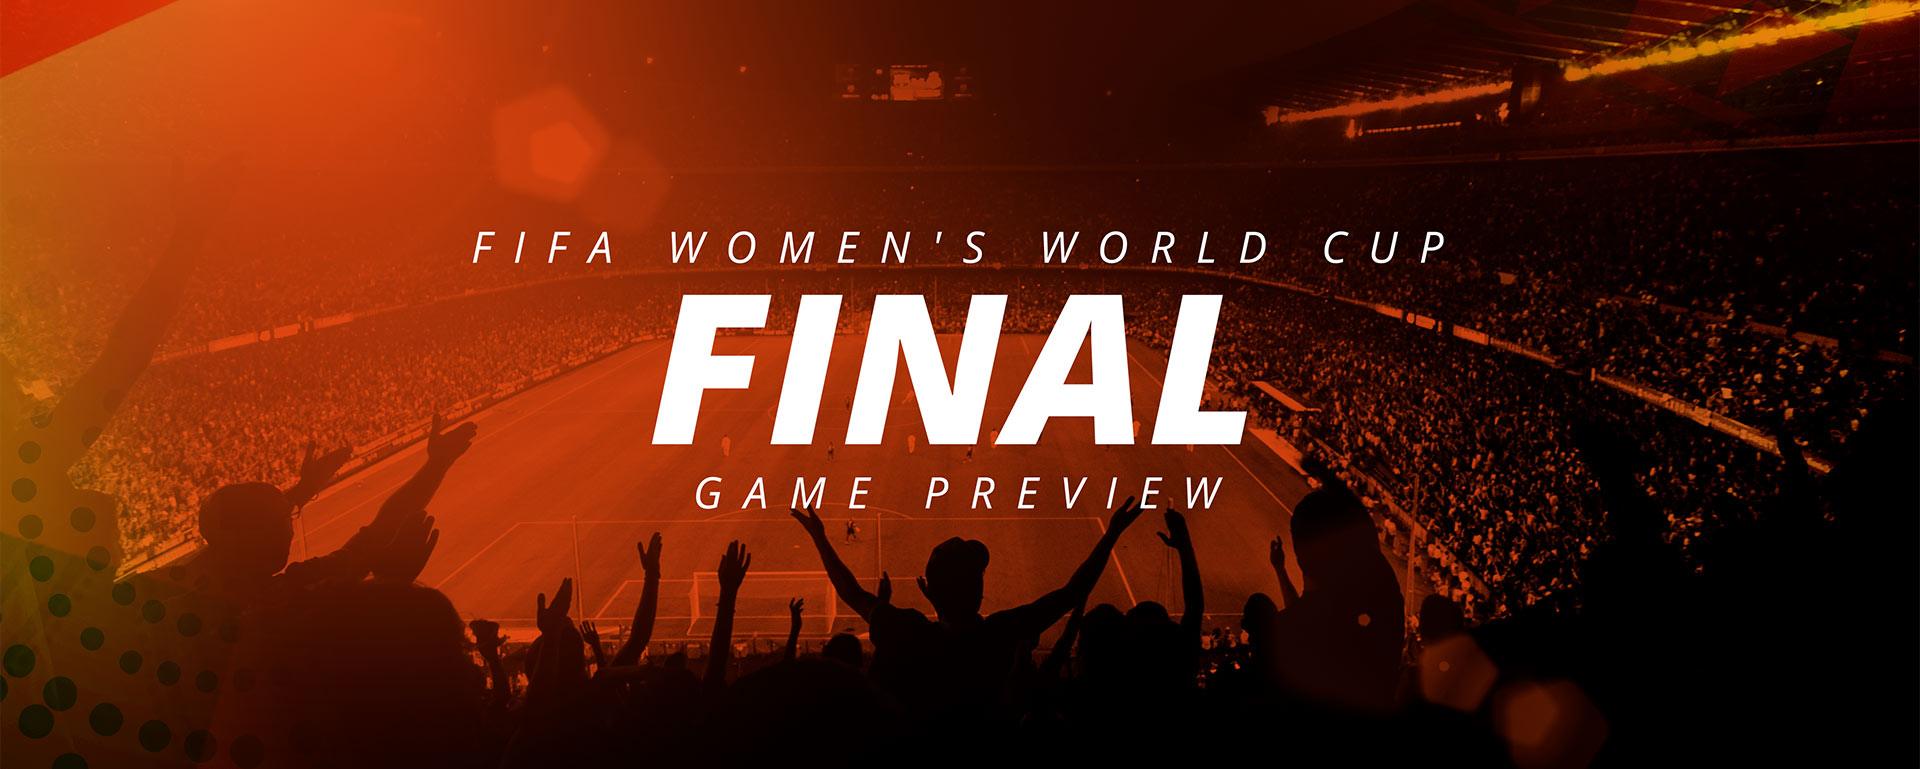 FIFA WOMEN’S WORLD CUP FINAL PREVIEW